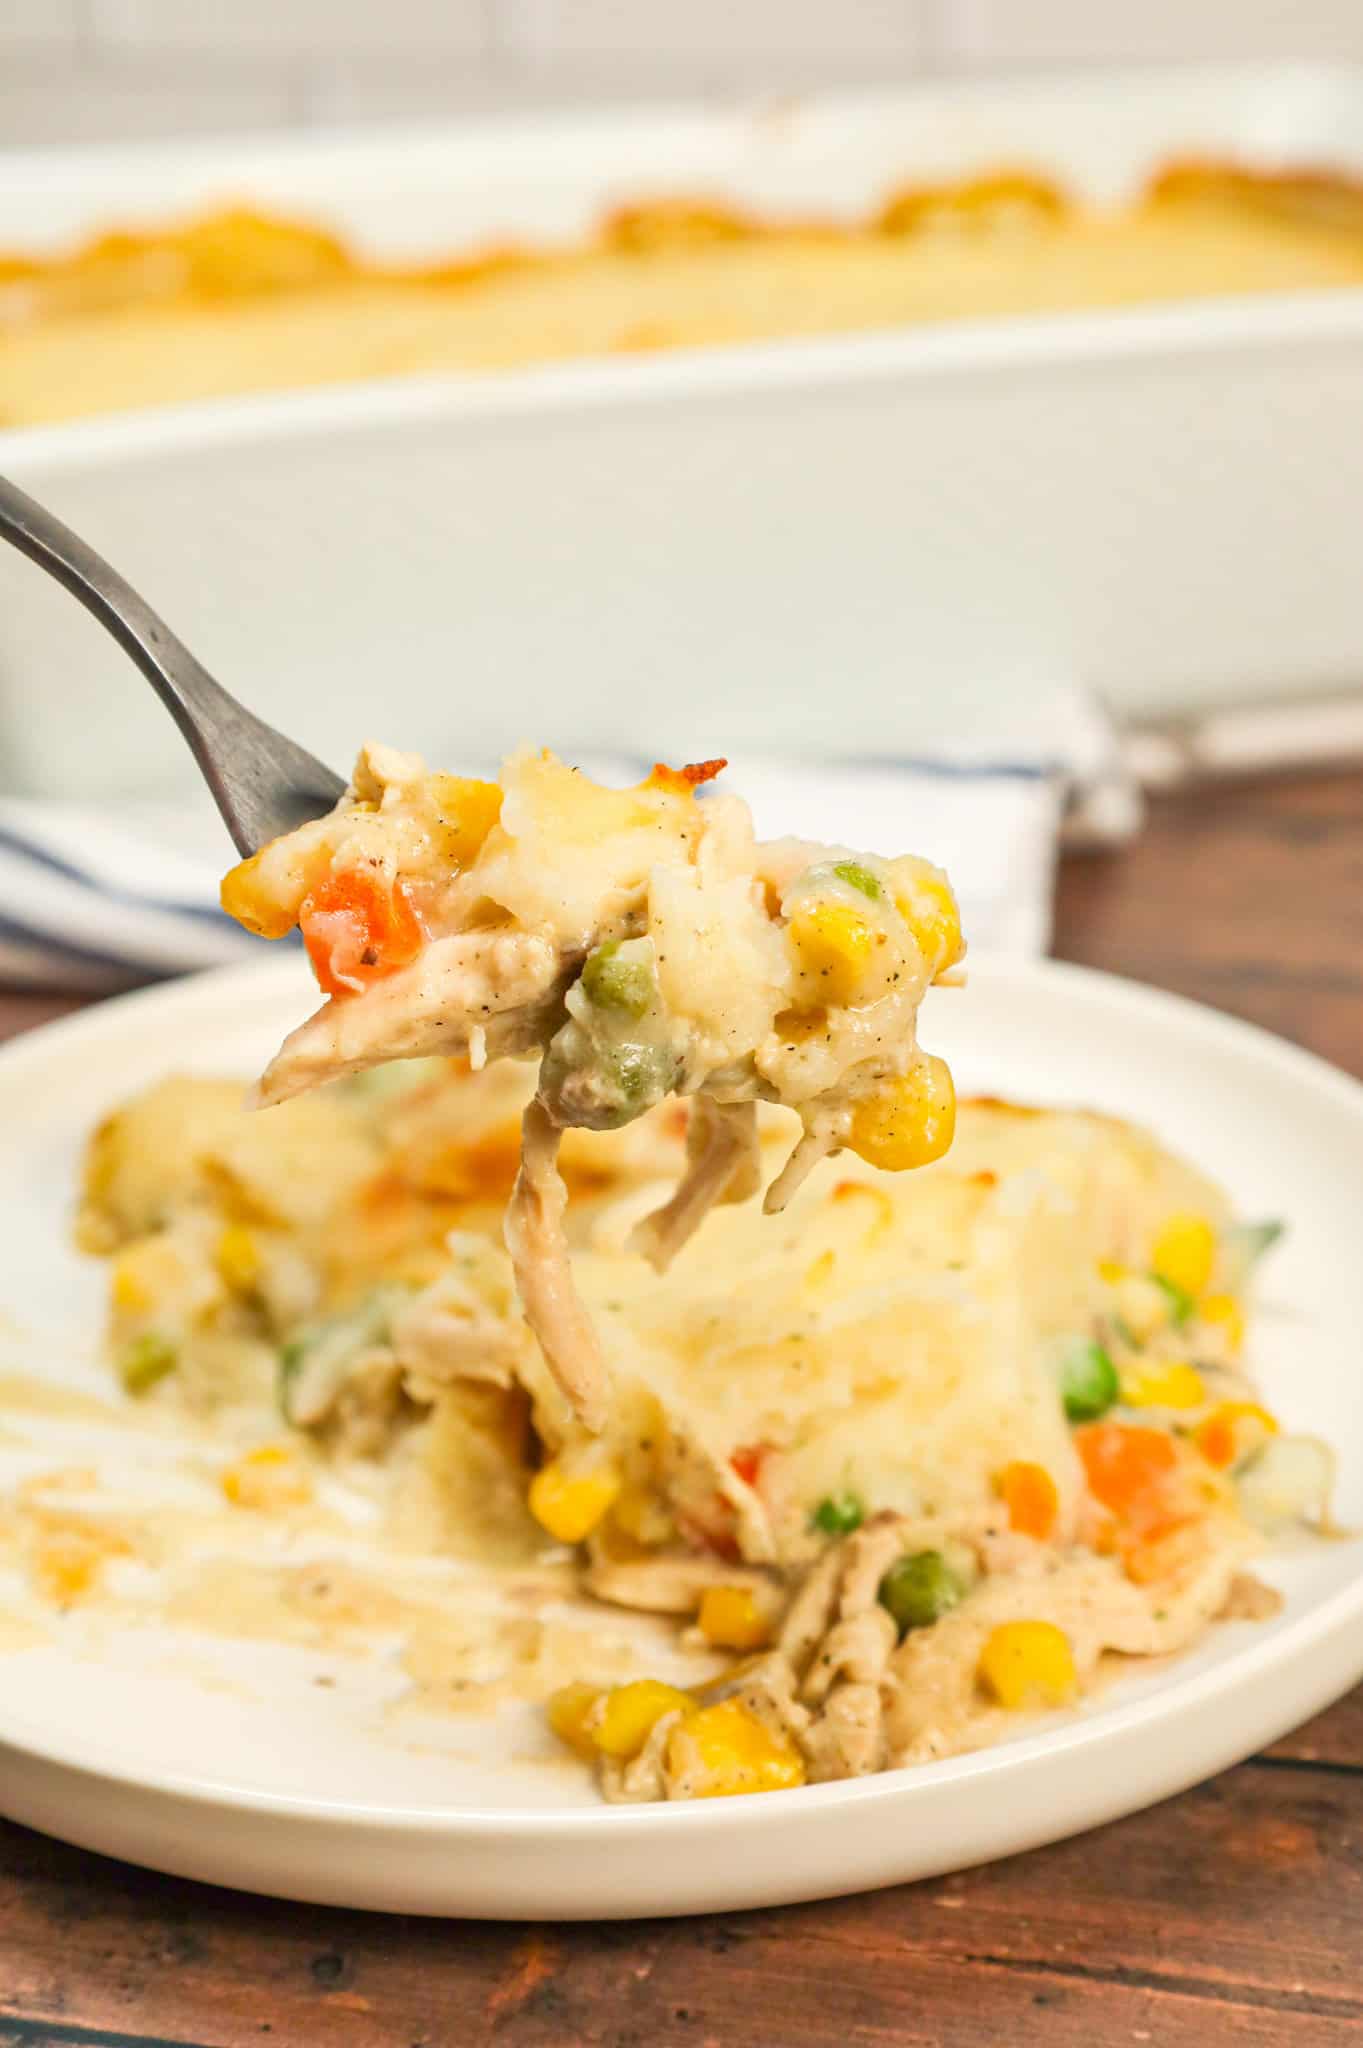 Chicken Shepherd's Pie is an easy dinner recipe loaded with shredded rotisserie chicken, mixed veggies, cream of mushroom soup and cream of chicken soup all baked with a layer of instant mashed potatoes on top.